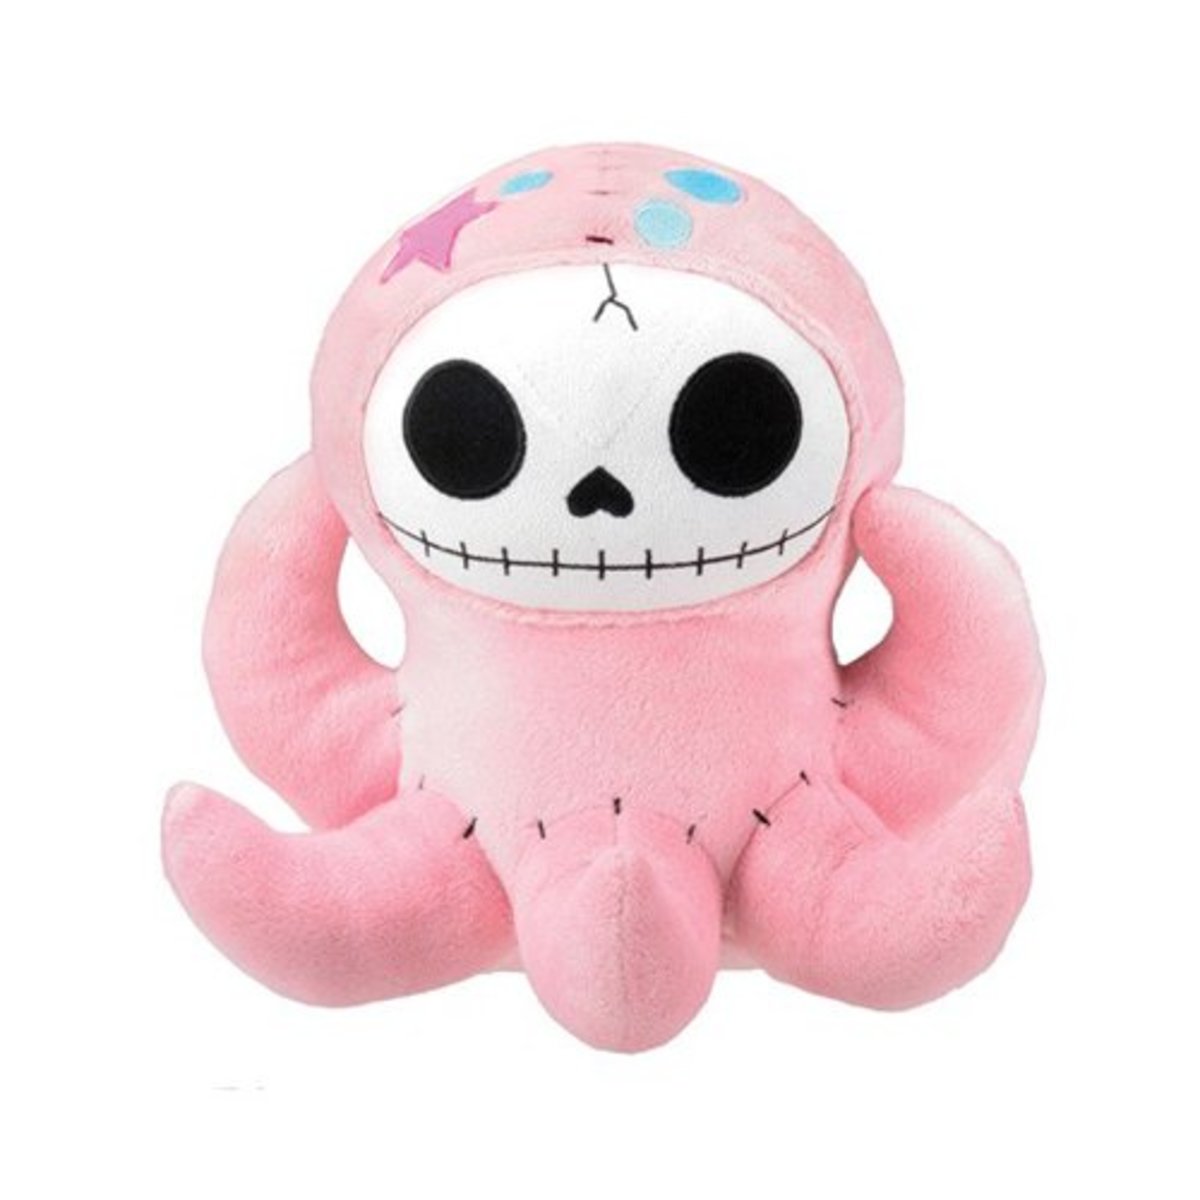 Furrybones Octopee Plush by Summit Collection.